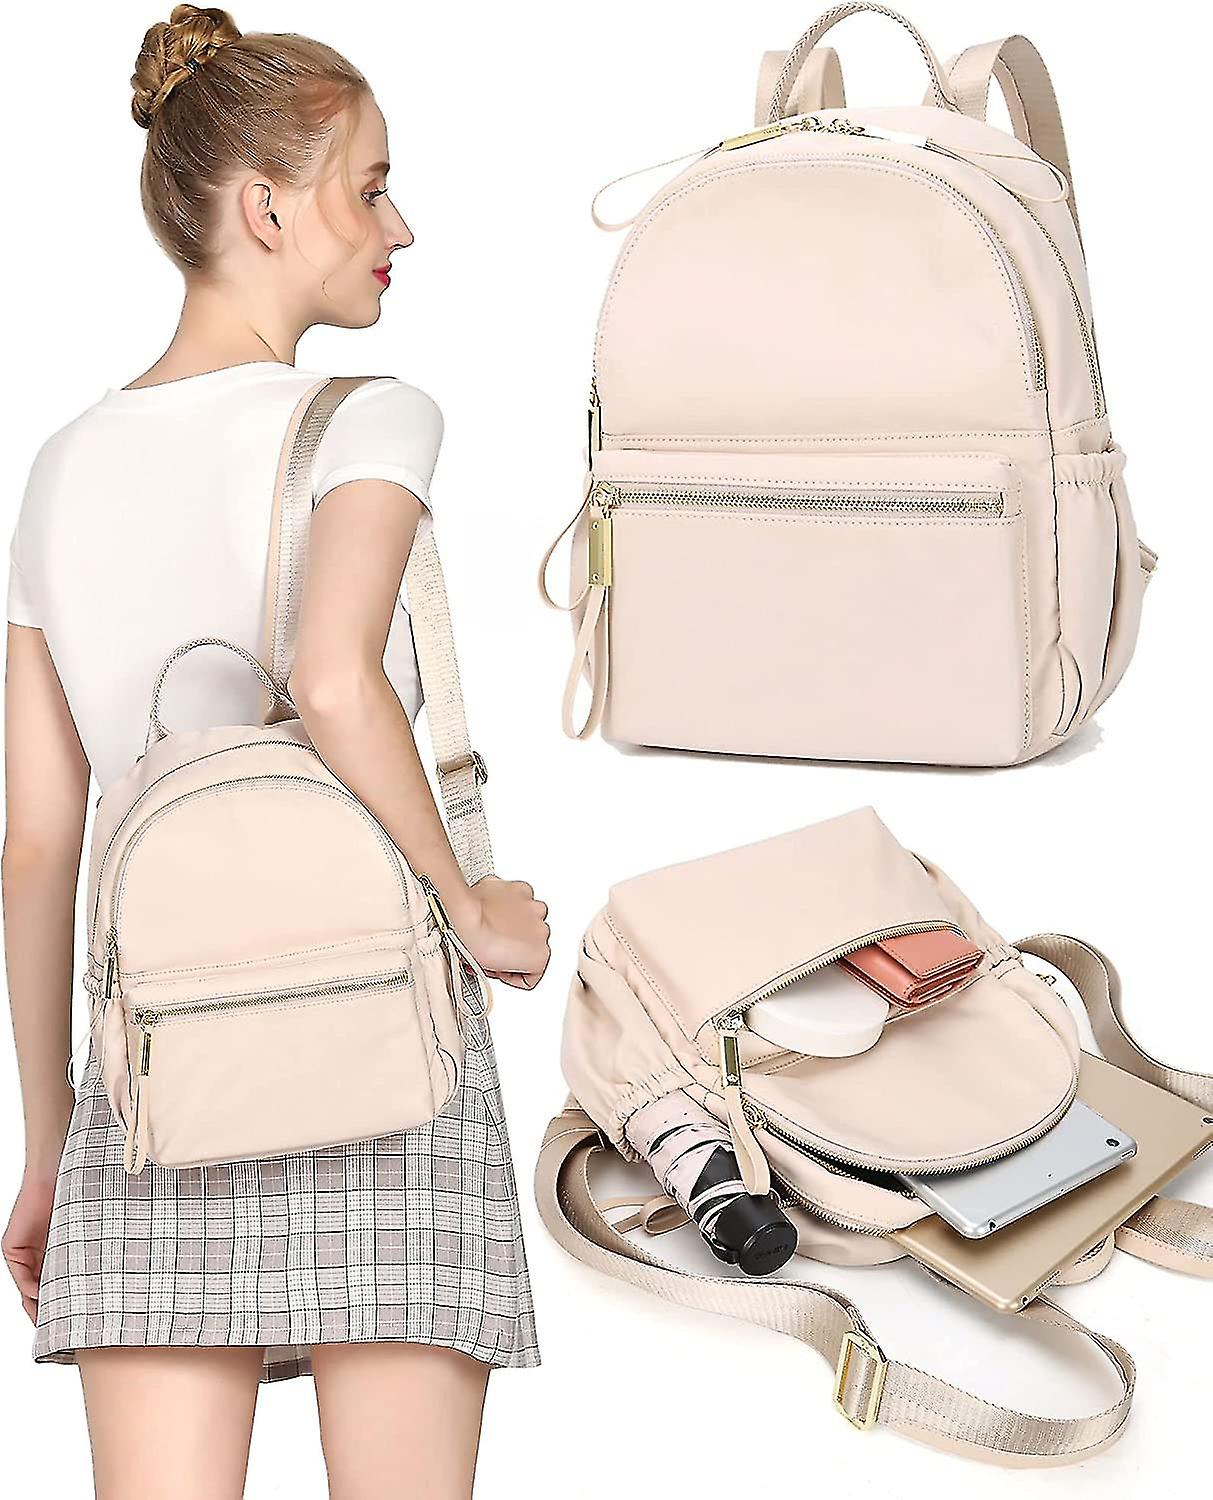 Women’s small backpack purse:Effortless Style on the Go缩略图